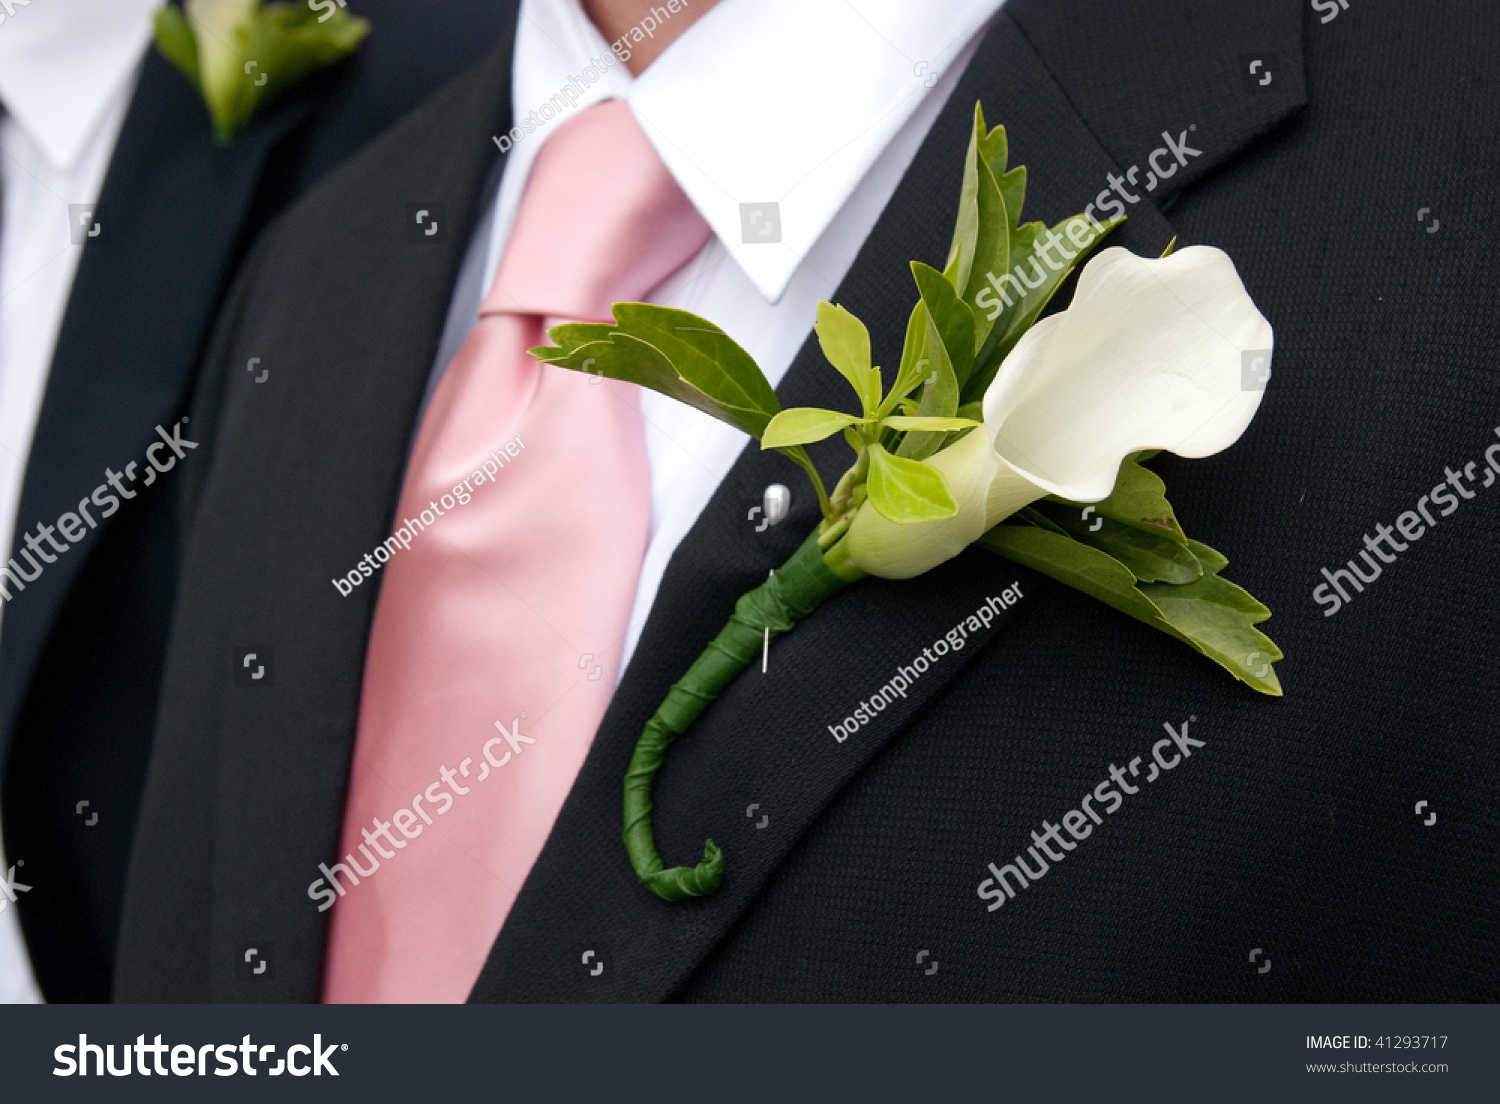 White Calla Lily Boutonniere On Black Stock Photo Edit Now 41293717